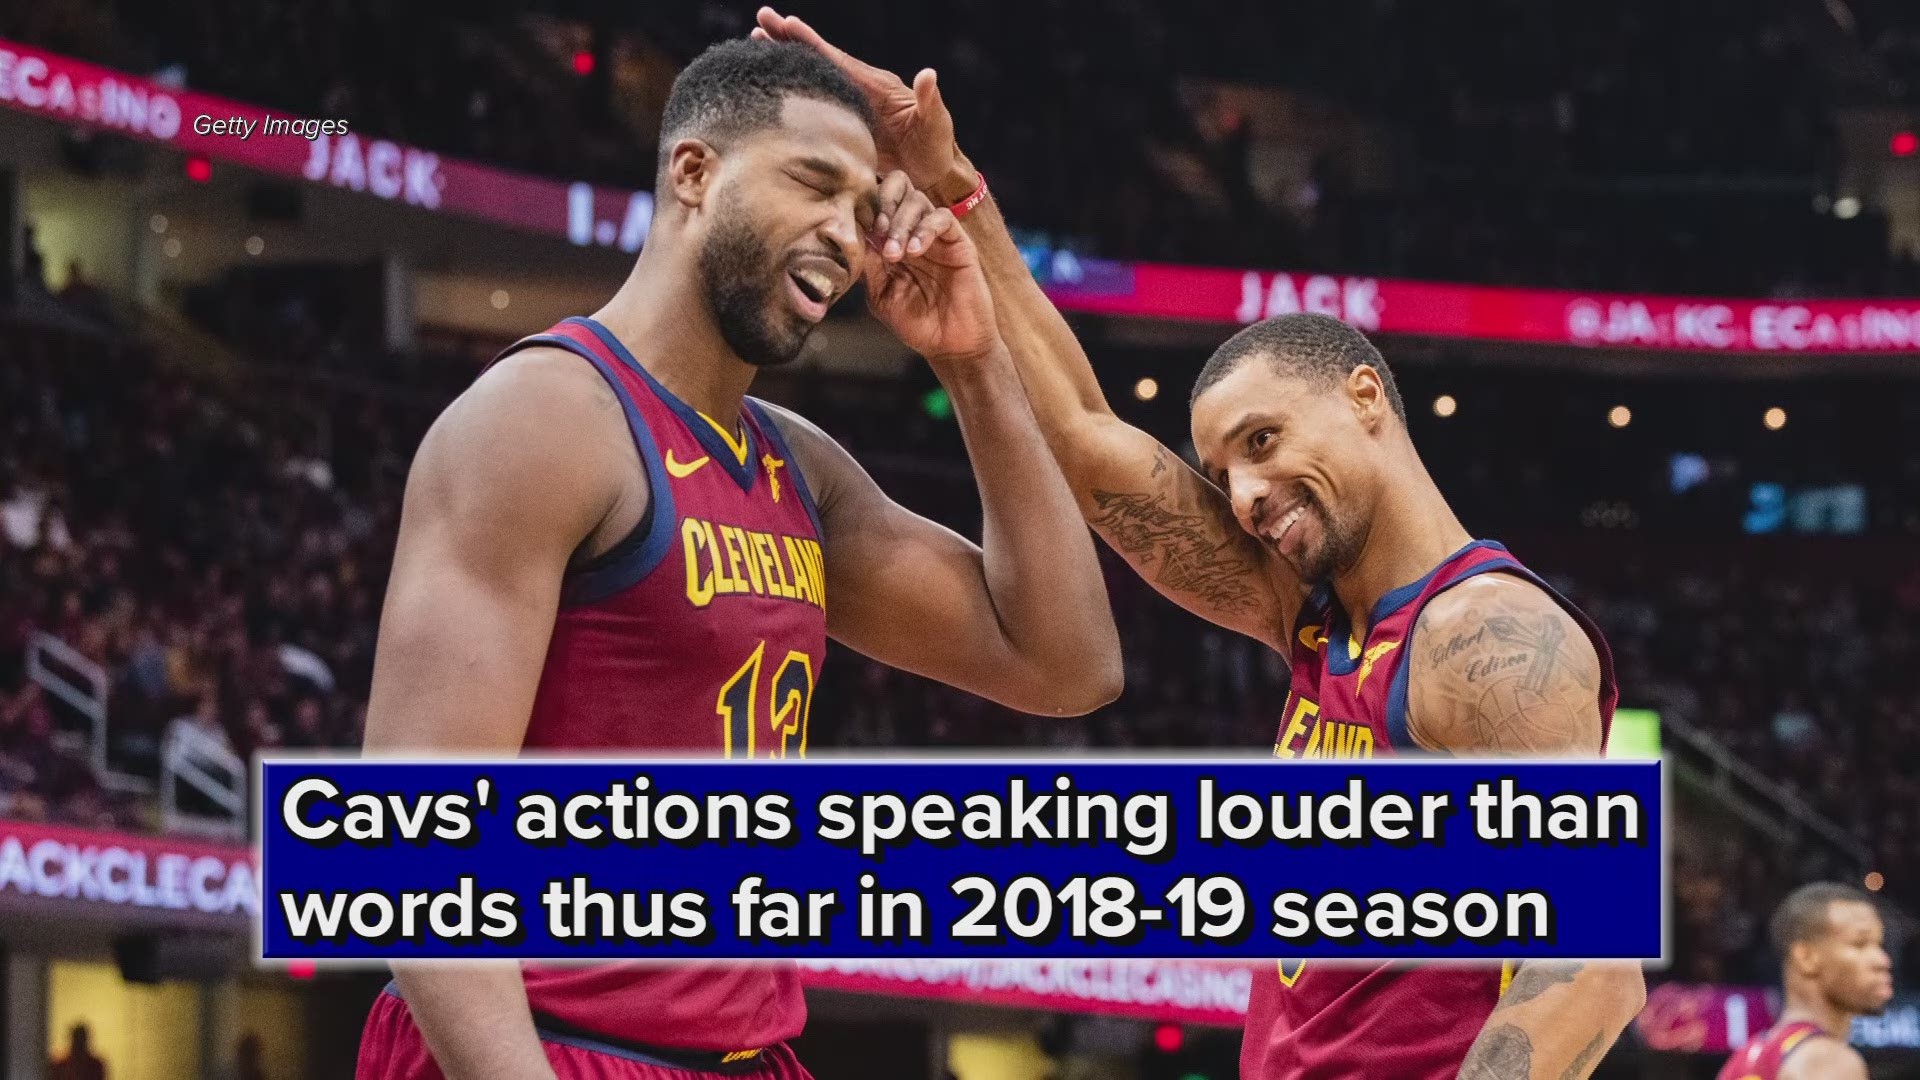 Cleveland Cavaliers' actions speaking louder than words thus far in 2018-19 season